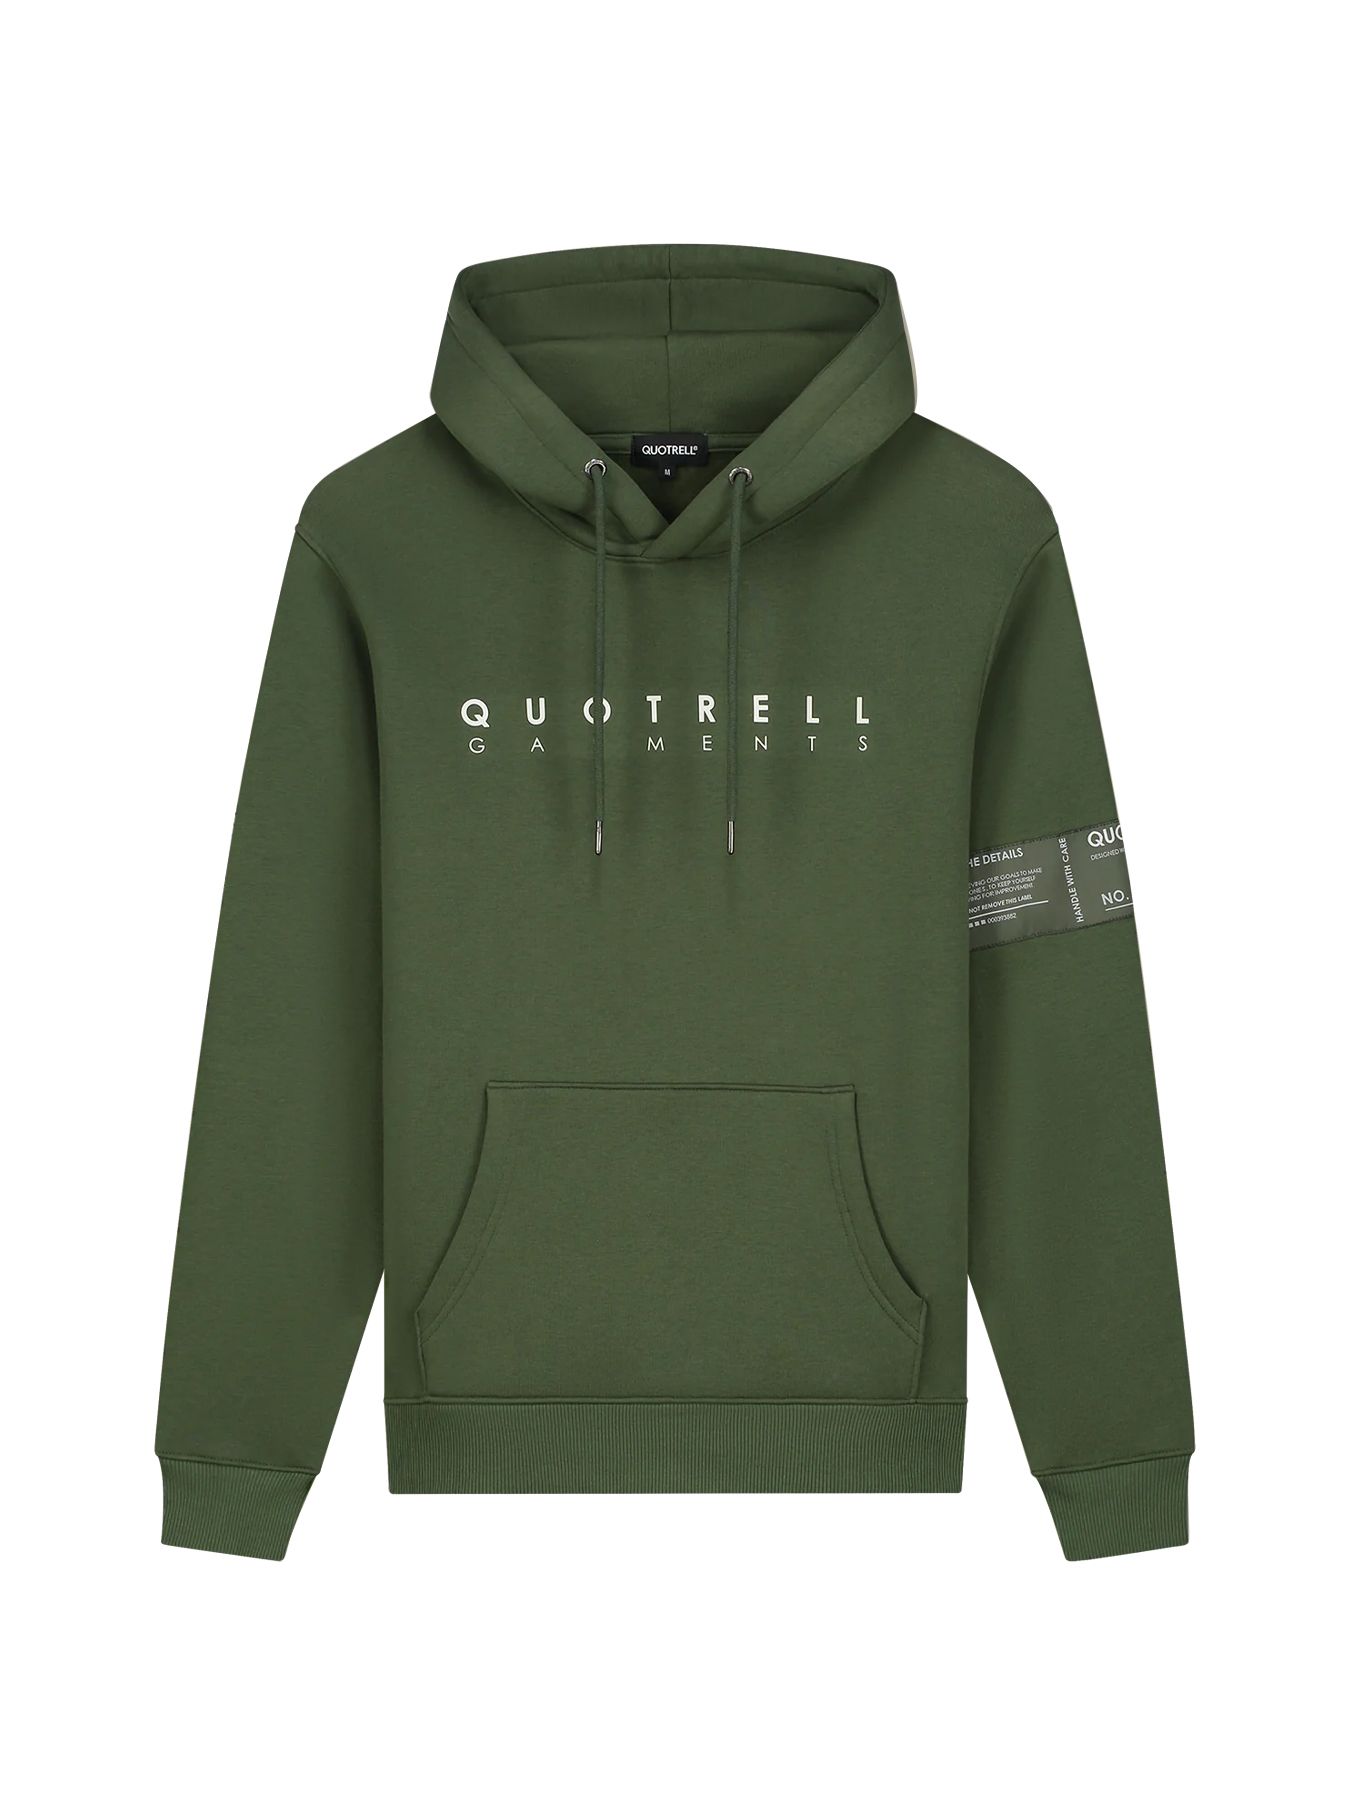 Quotrell Aruba hoodie Army green/White 00106010-ARMGR